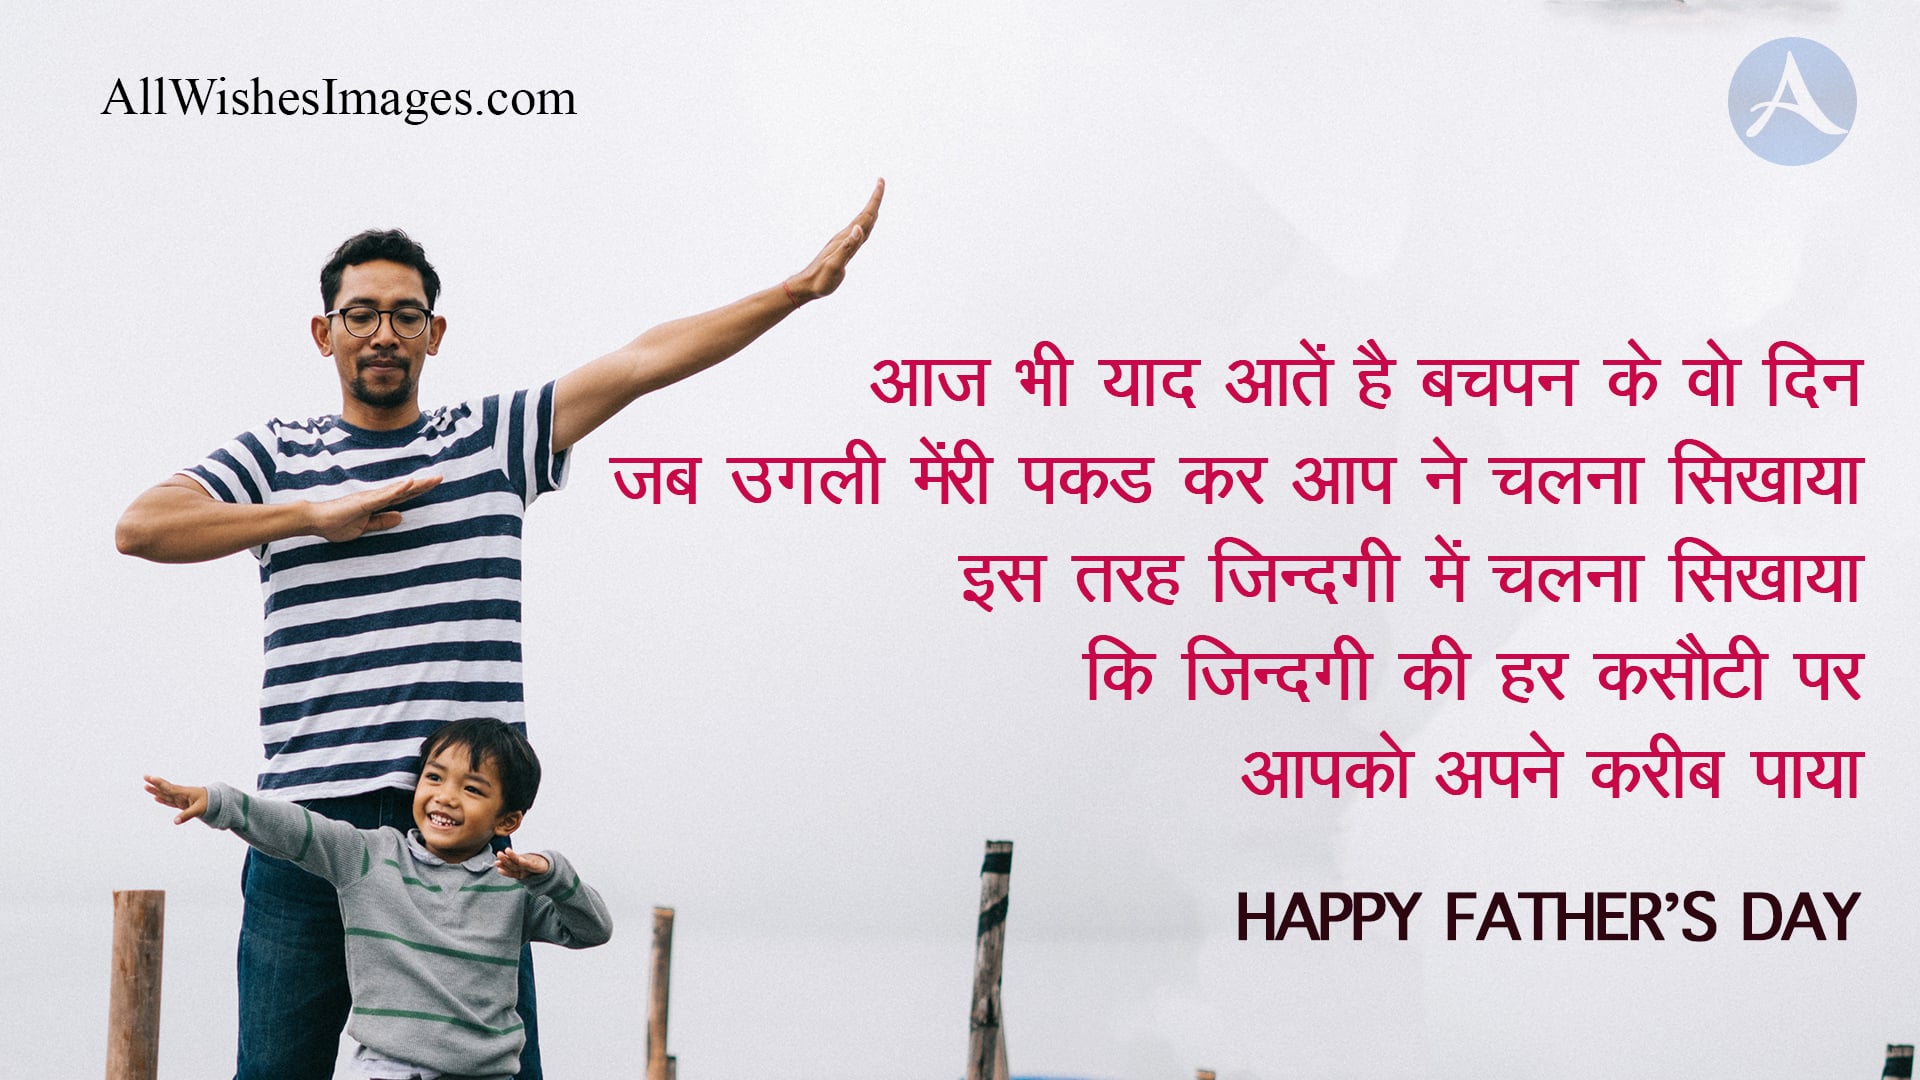 fathers day images in hindi - All Wishes Images - Images for WhatsApp